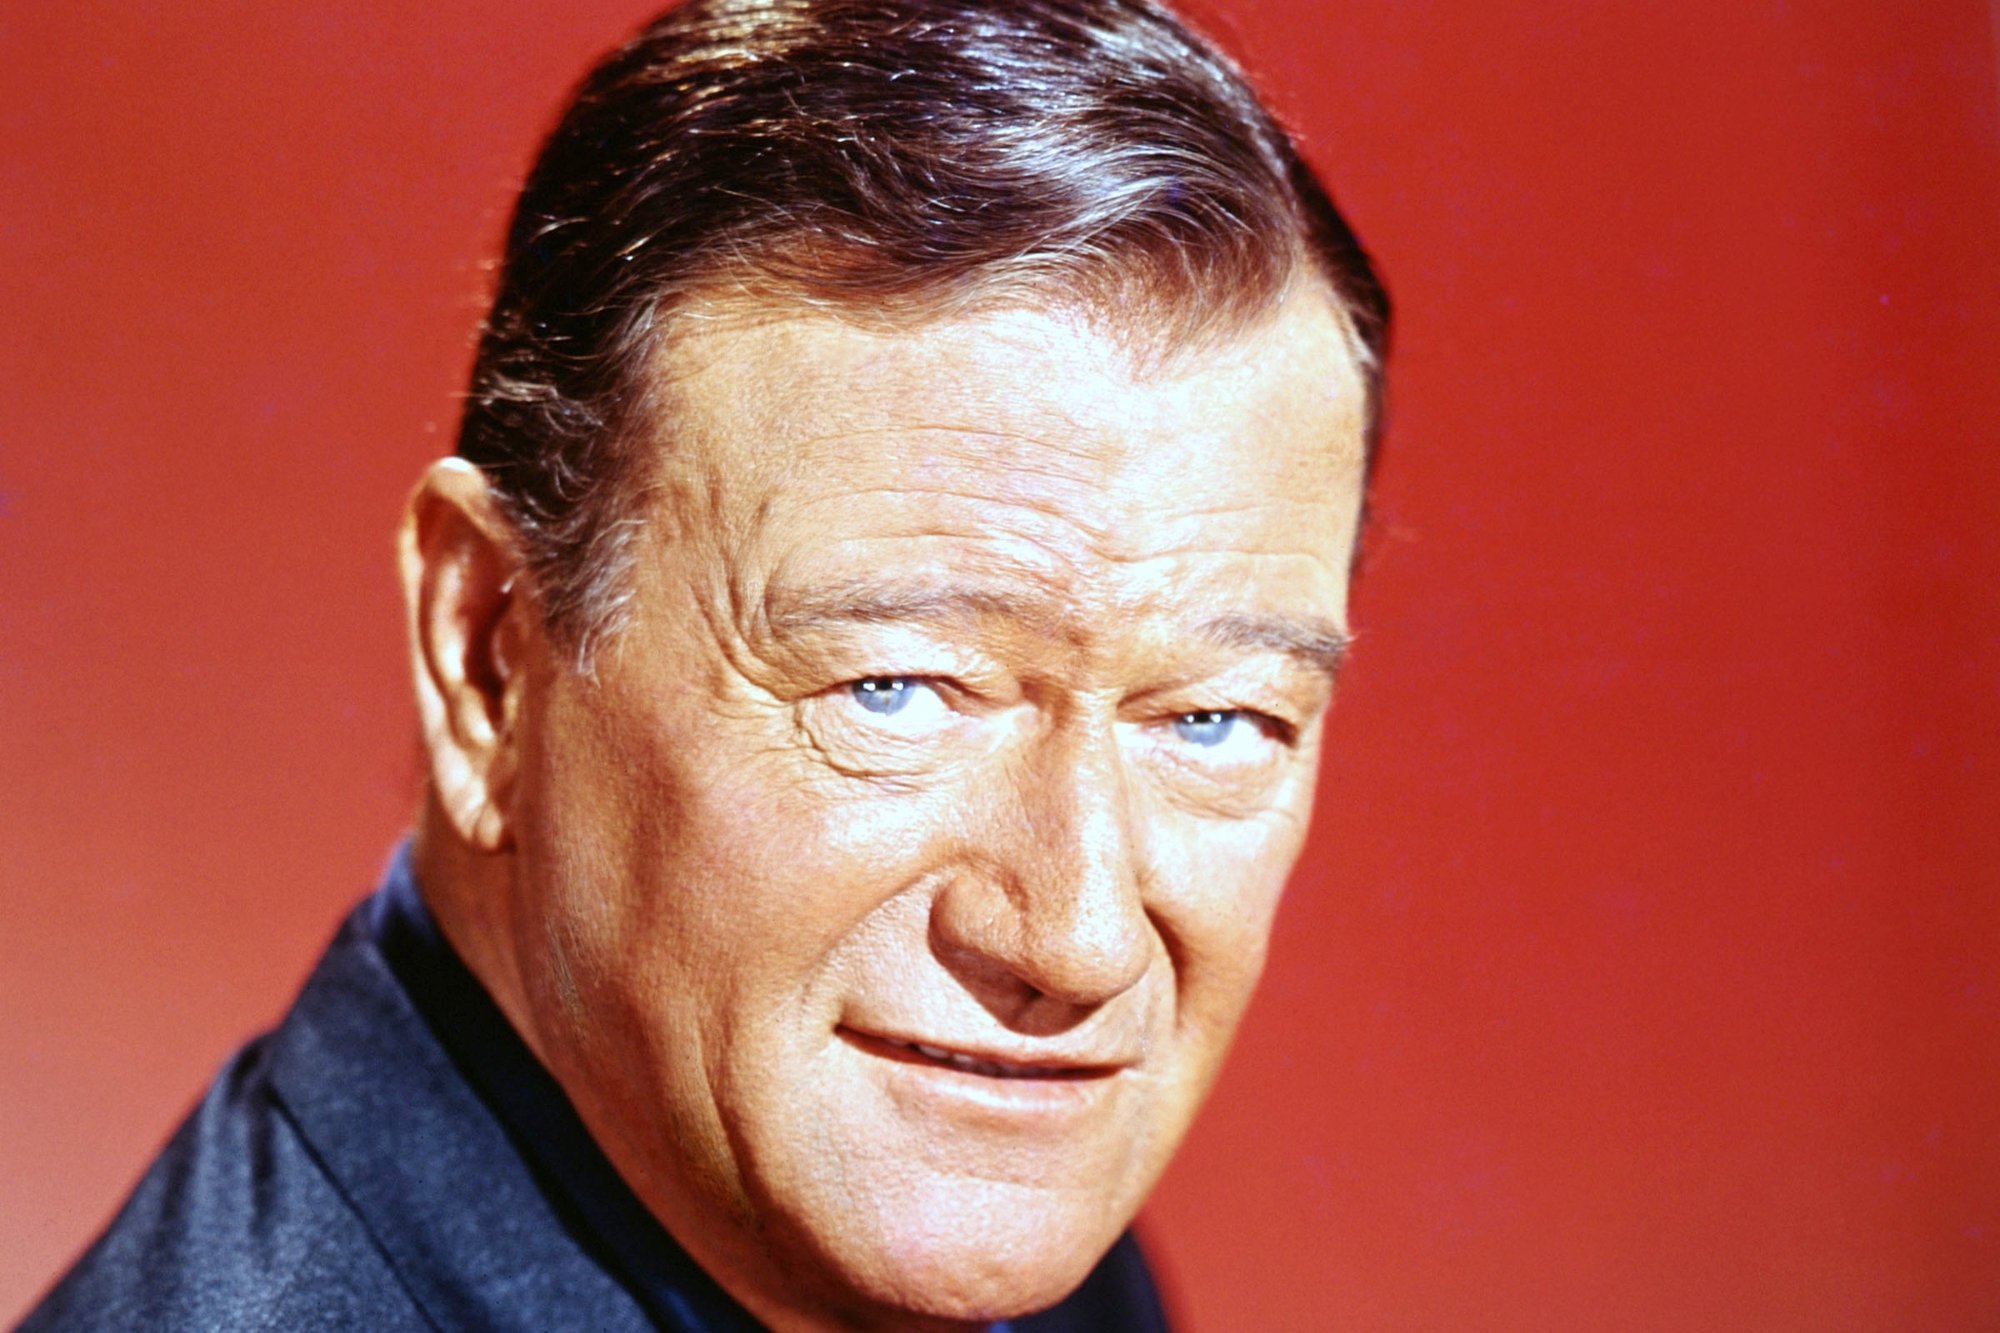 Movie star John Wayne wearing a navy blue jacket and a blue collared shirt underneath in front of a red background